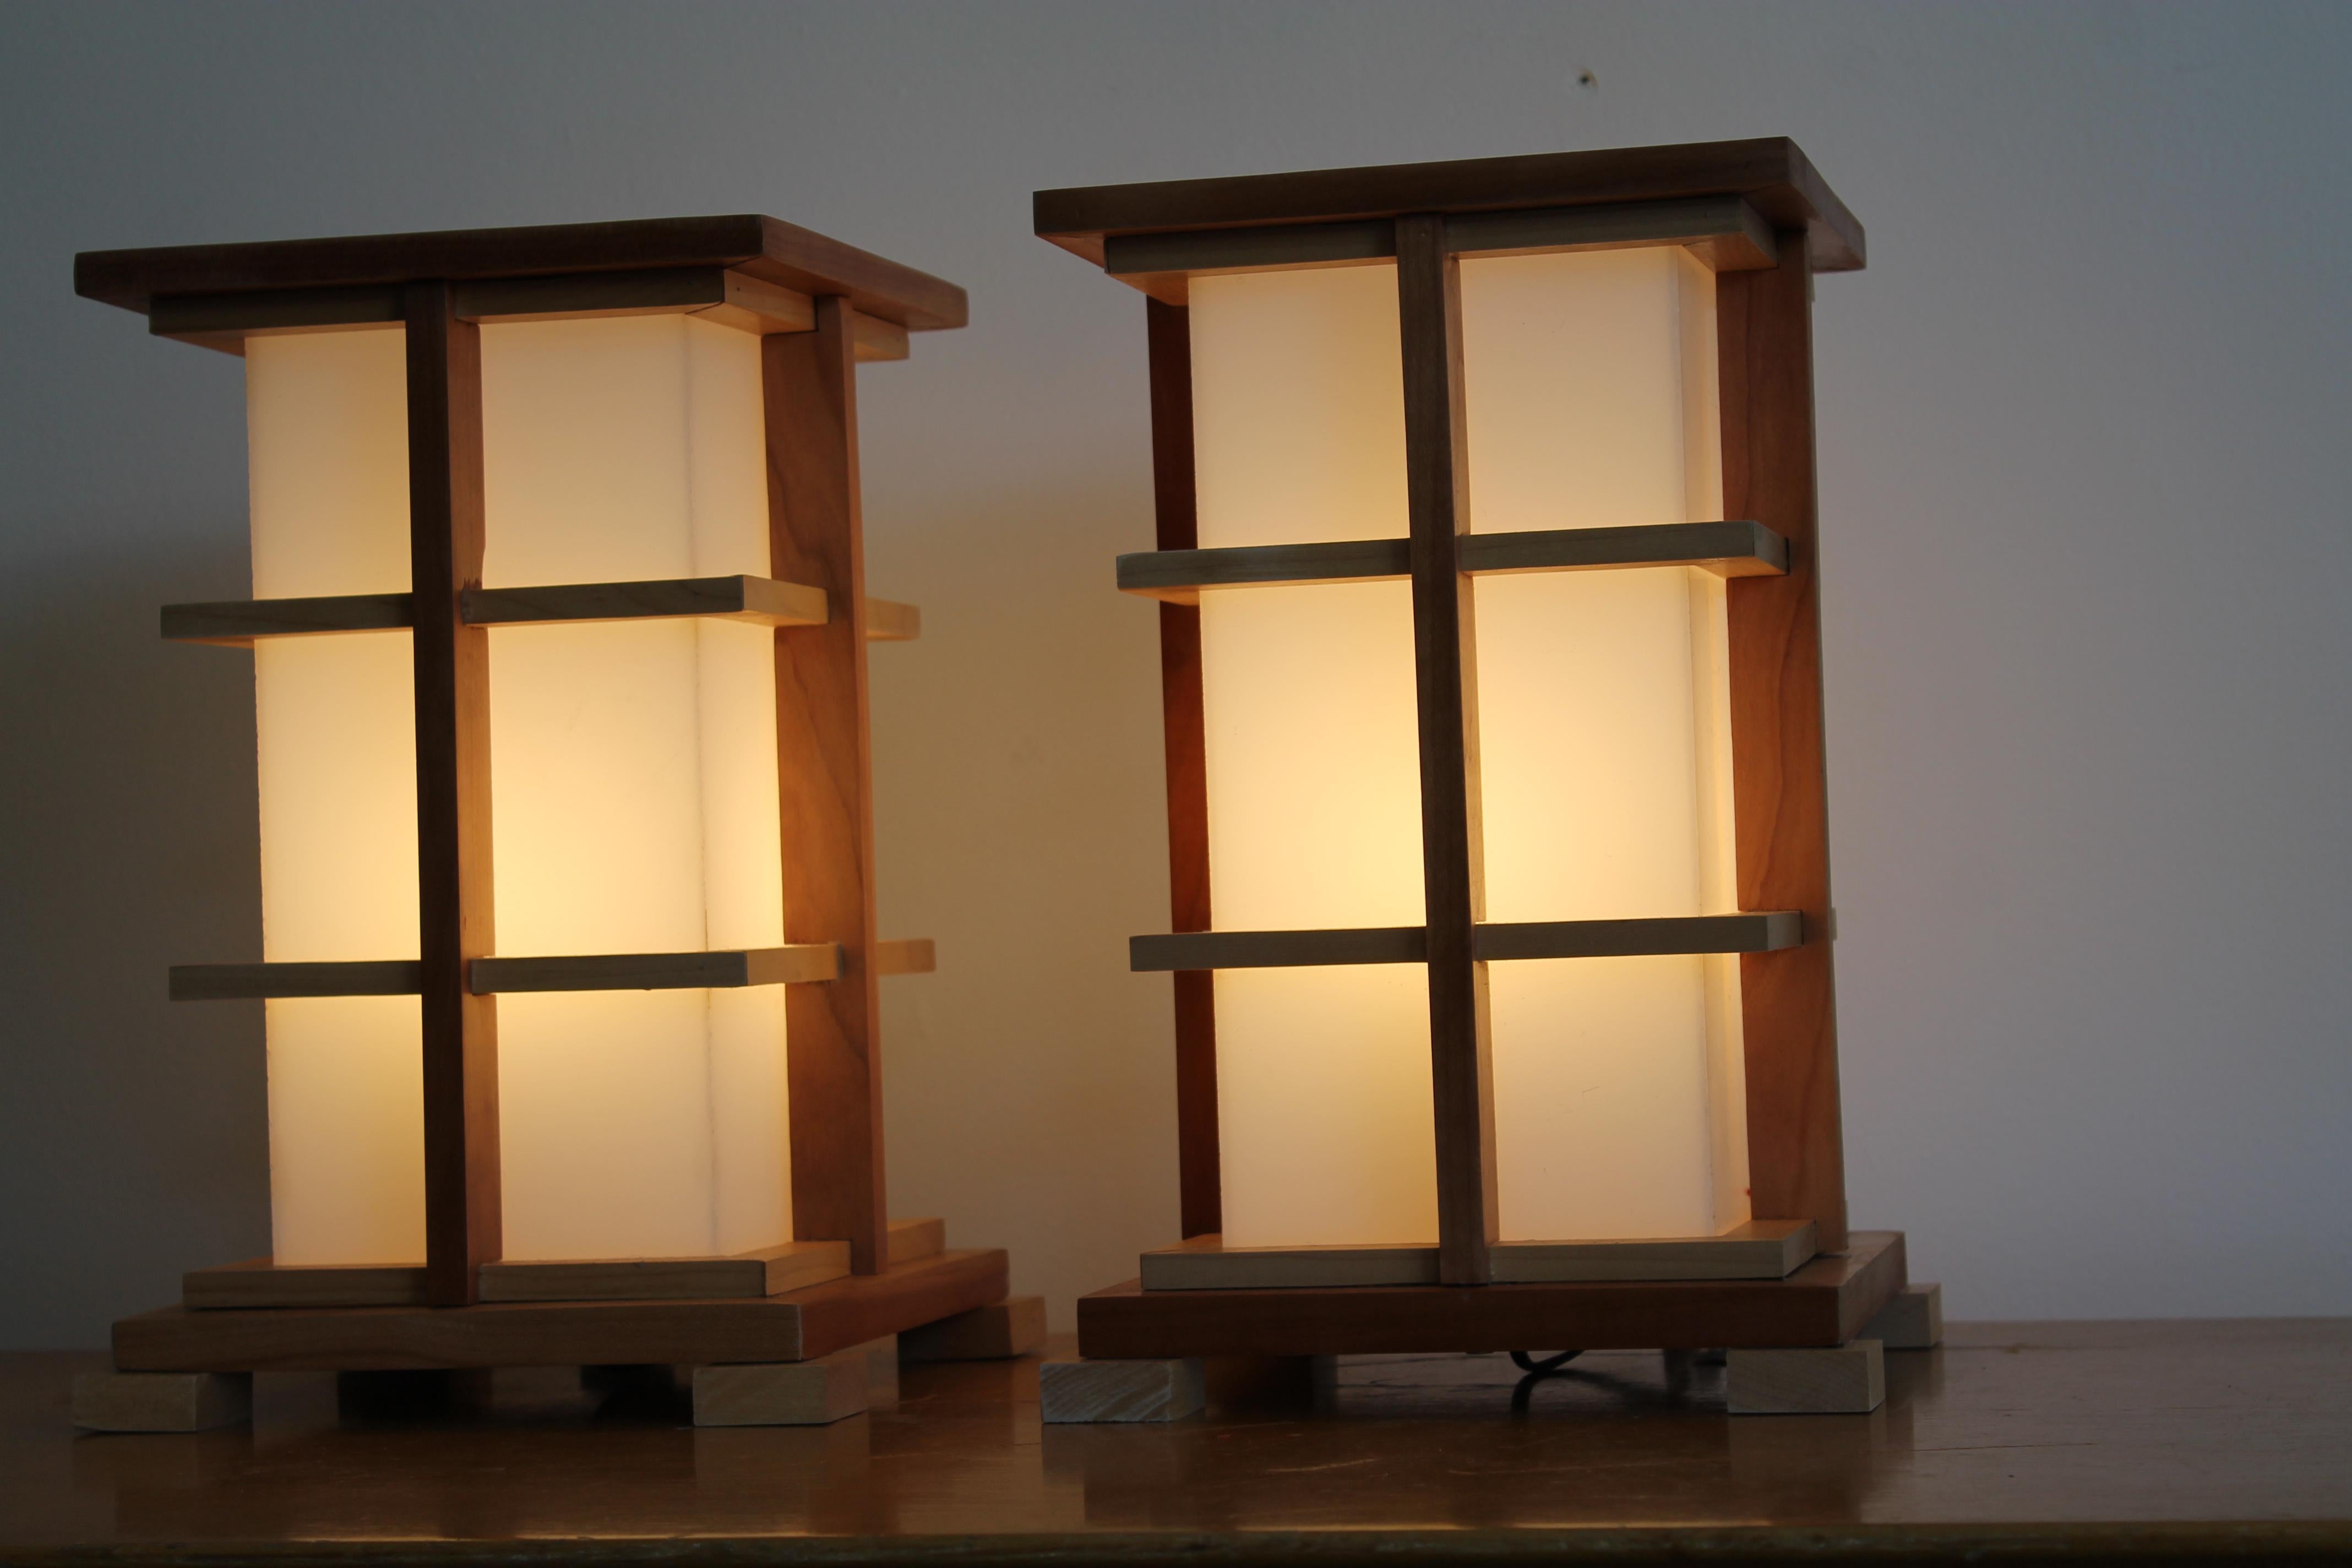 A matched pair of wood and Lucite table lamps, artisan made, one of a kind. Each lamp measures 13.5